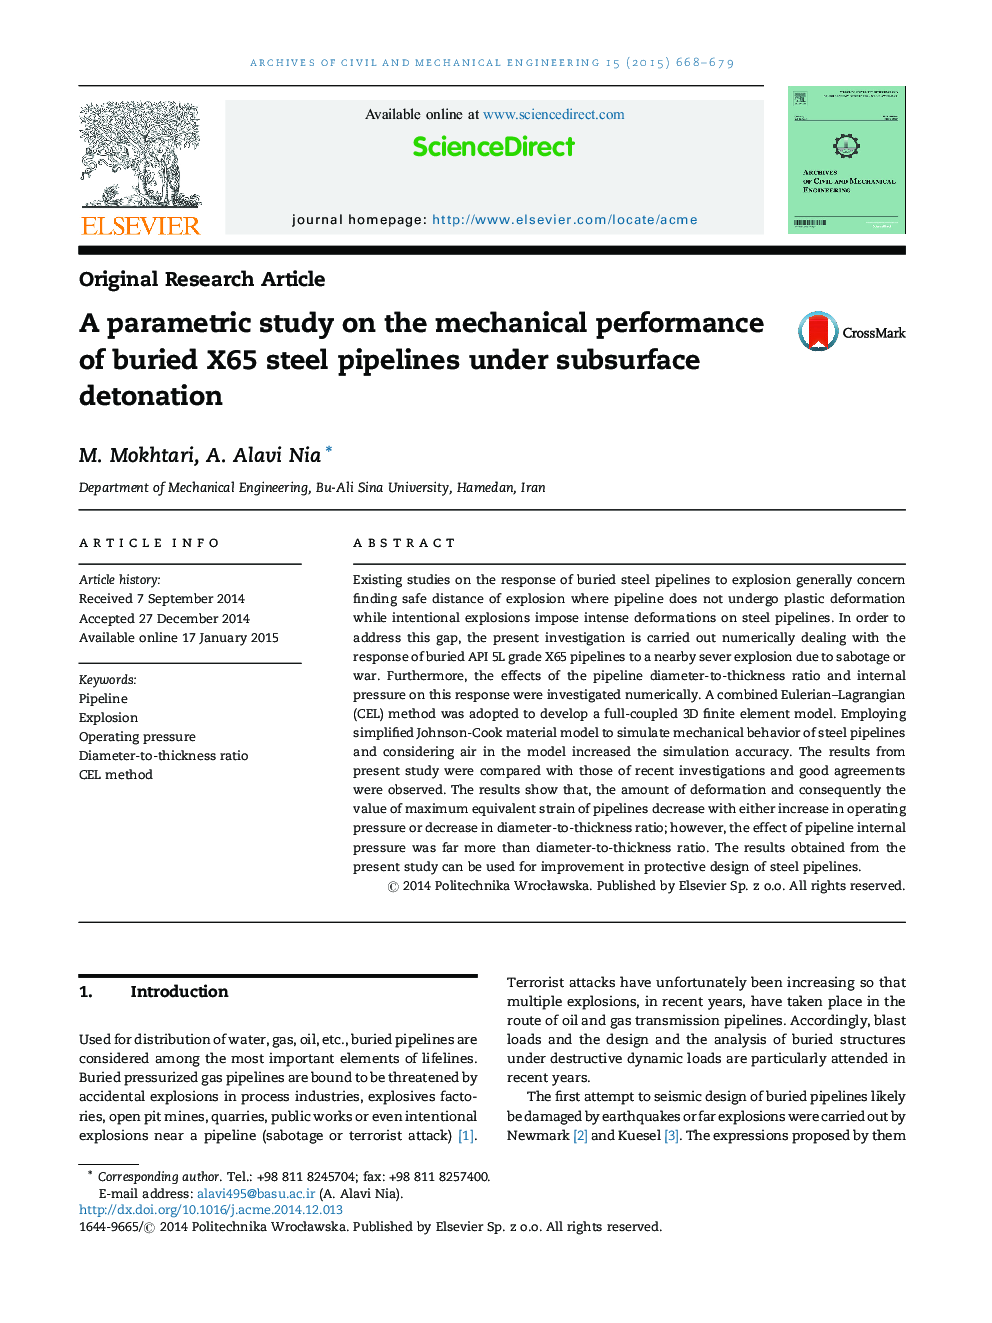 A parametric study on the mechanical performance of buried X65 steel pipelines under subsurface detonation